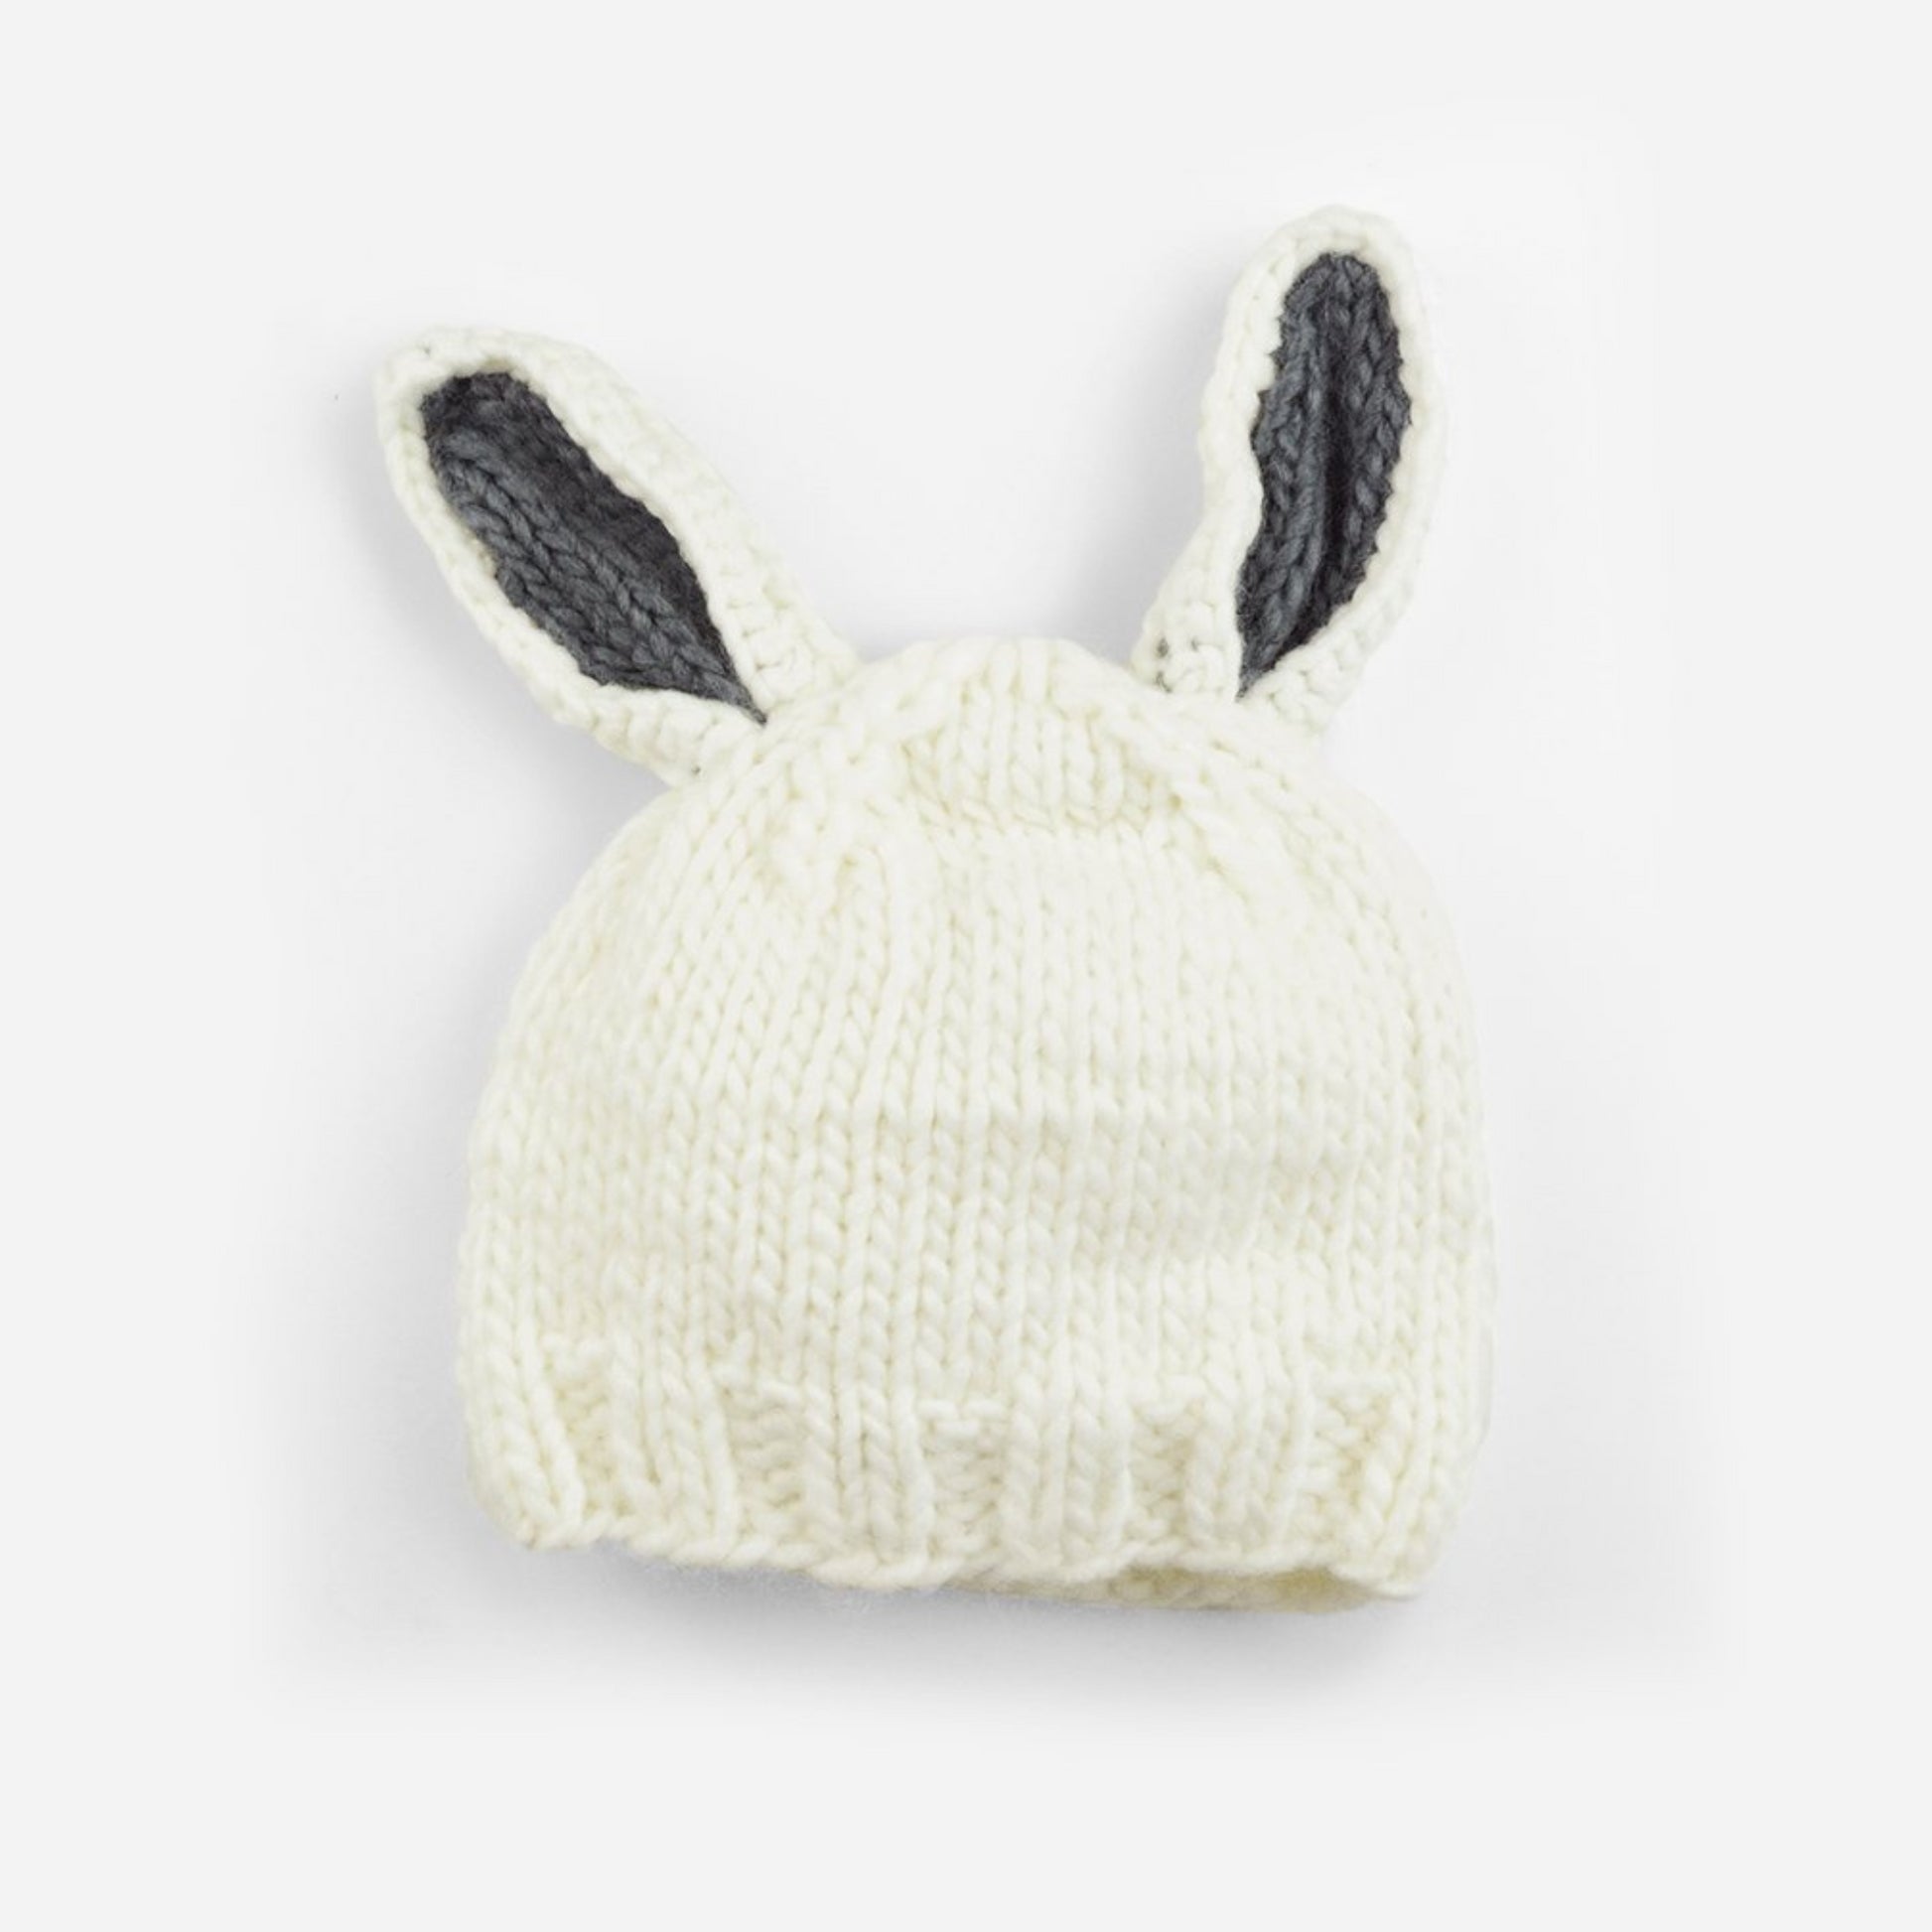 White bunny hat with gray ears